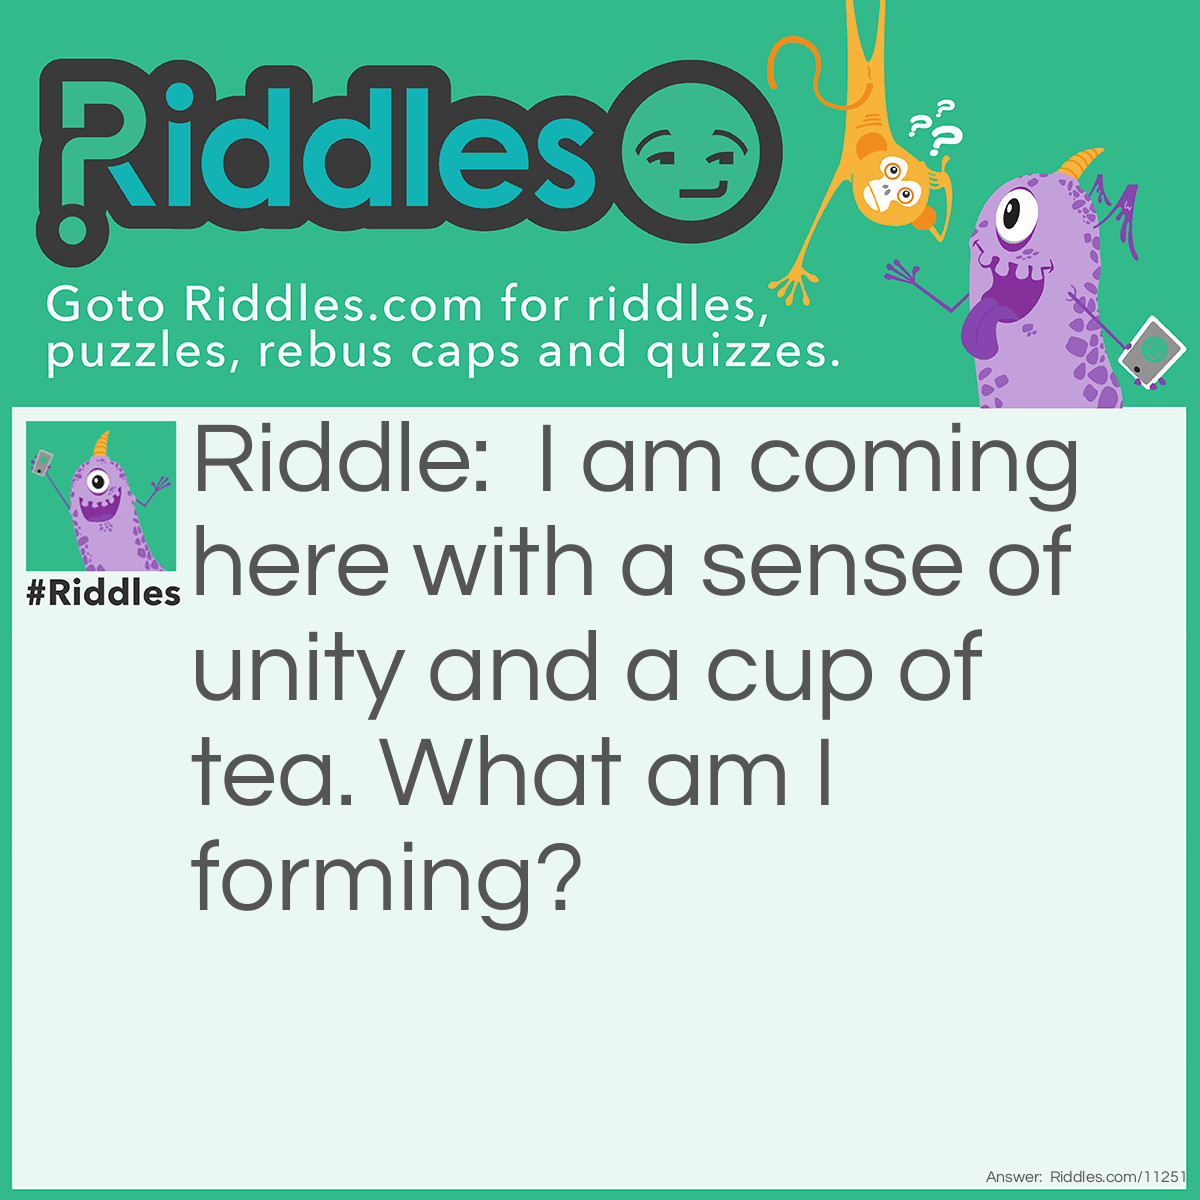 Riddle: I am coming here with a sense of unity and a cup of tea. What am I forming? Answer: A community.